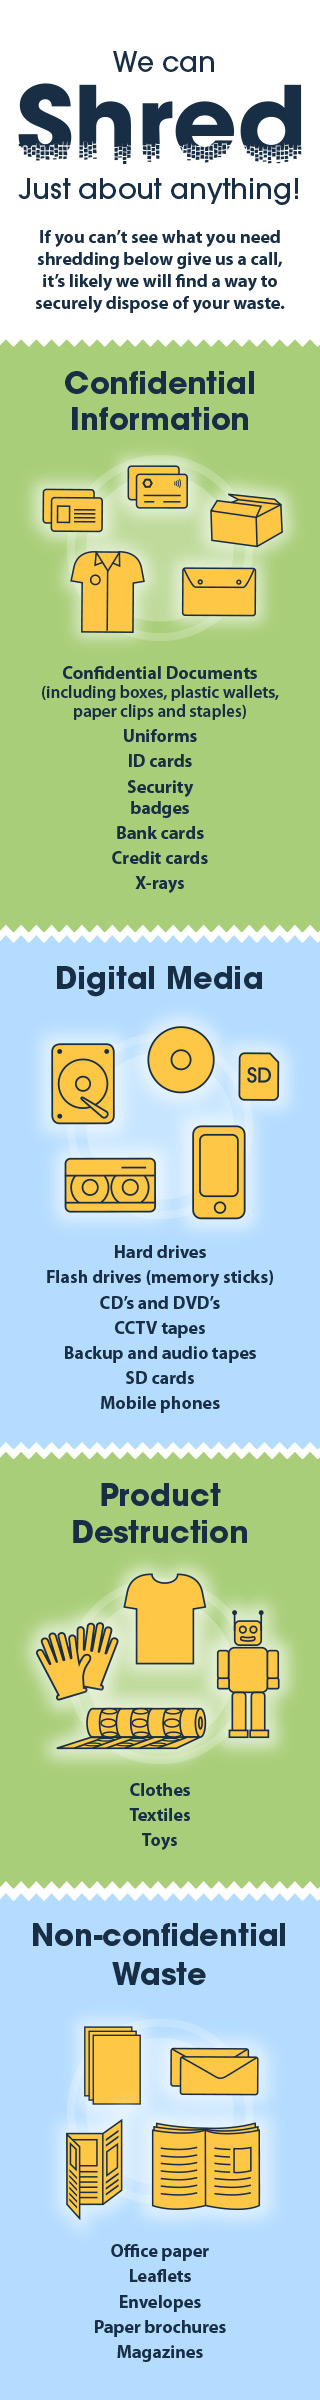 Infographic showing examples of items that can be shredded